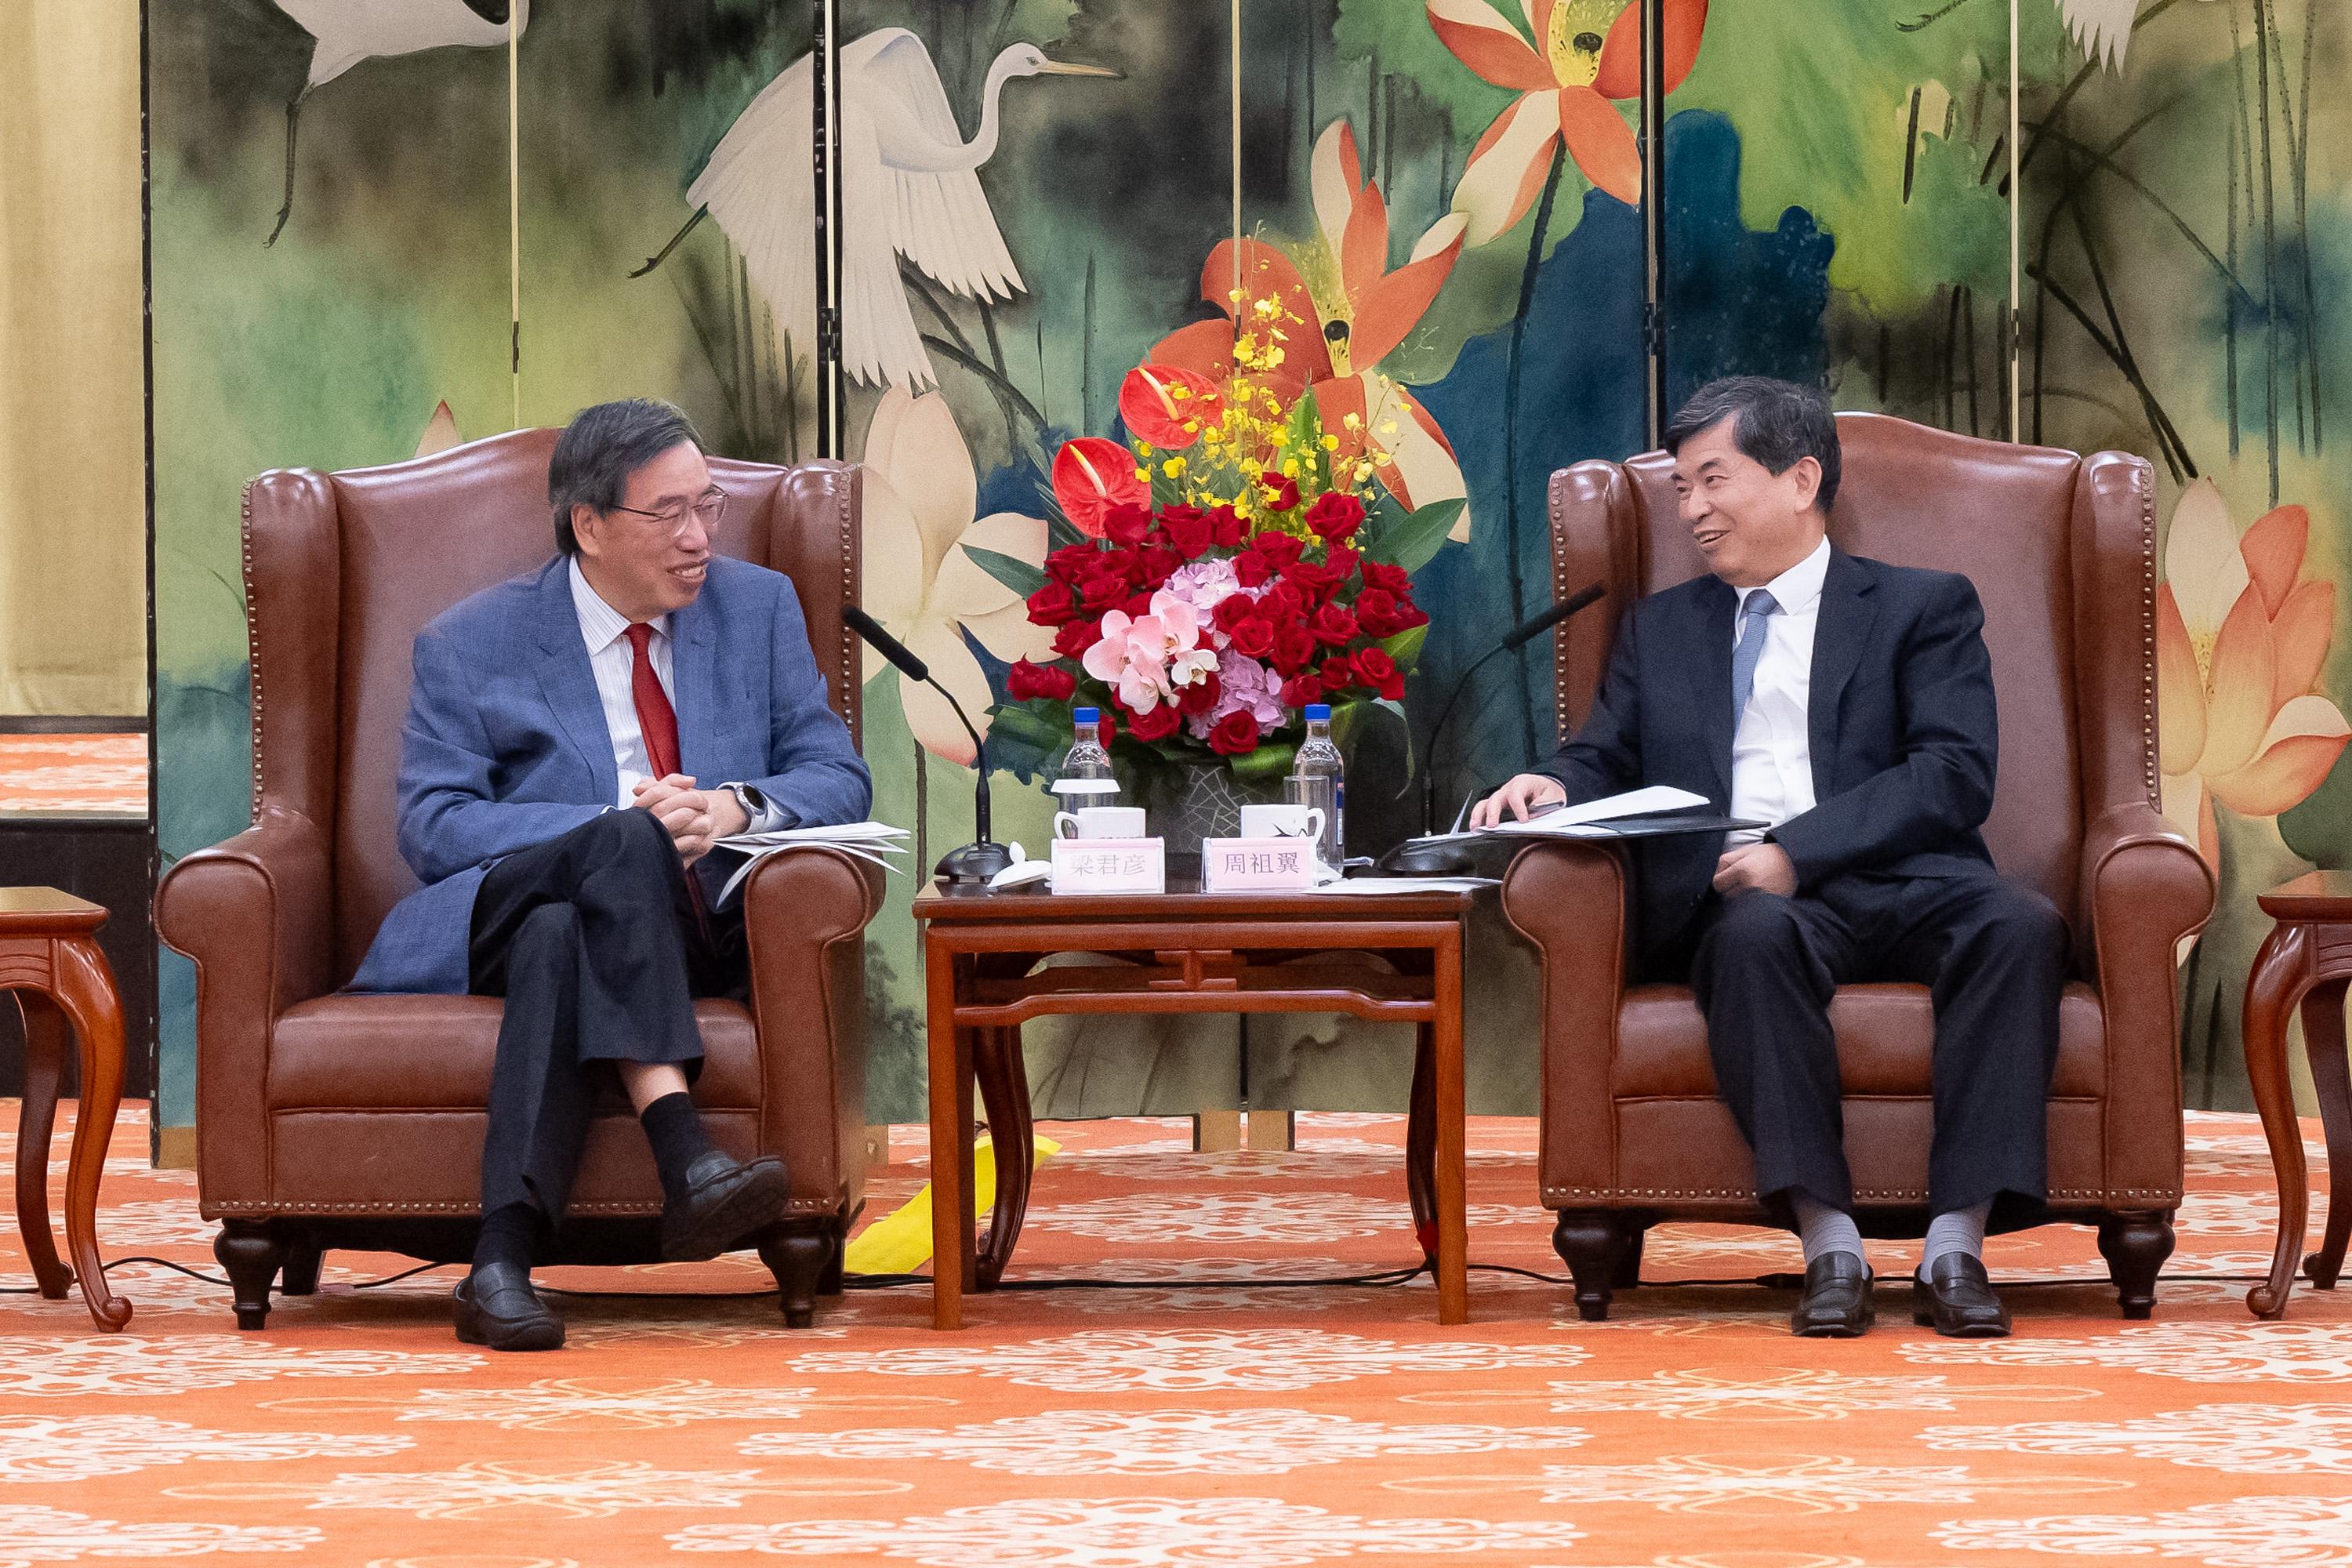 The Legislative Council (LegCo) delegation begins the five-day study visit in Fujian province today (July 15). Photo shows the President of LegCo, Mr Andrew Leung (left), meets the Secretary of Fujian Provincial Committee and Chairman of the Standing Committee of Fujian Provincial People's Congress, Mr Zhou Zuyi (right).

